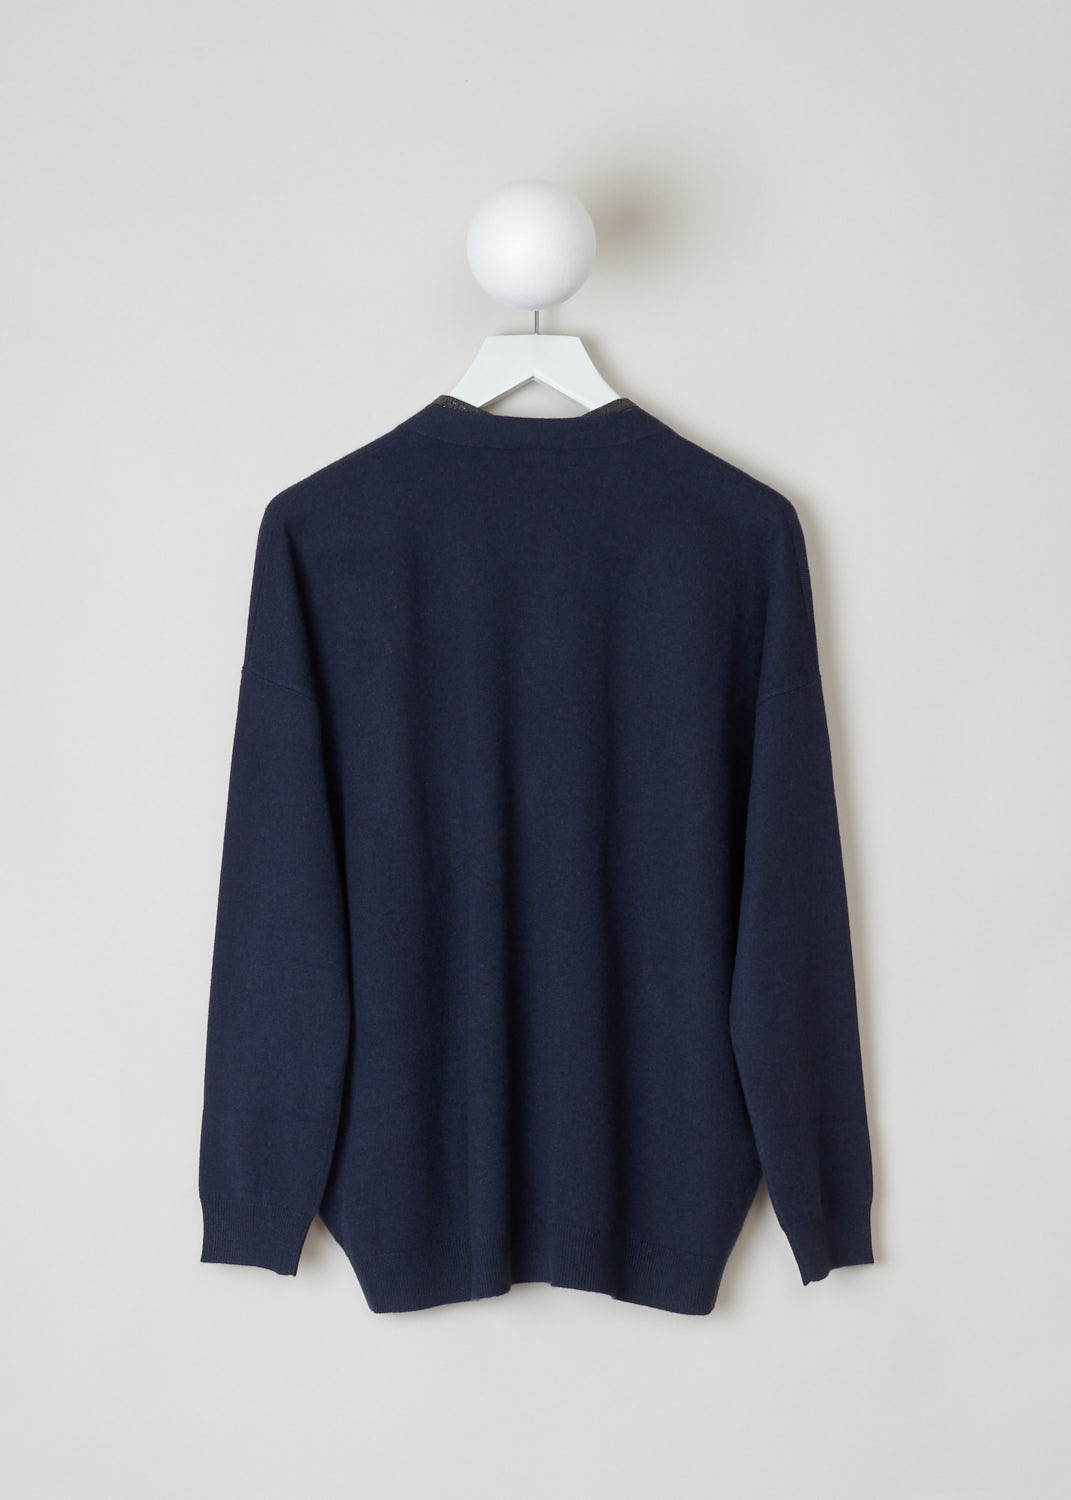 Brunello Cucinelli, Oversized navy cardigan, M16120506_CX033, blue, back, Navy colored cardigan featuring an oversized fit with long sleeves. Furthermore this cardigan comes with self-tie features being their signature line on beads. 